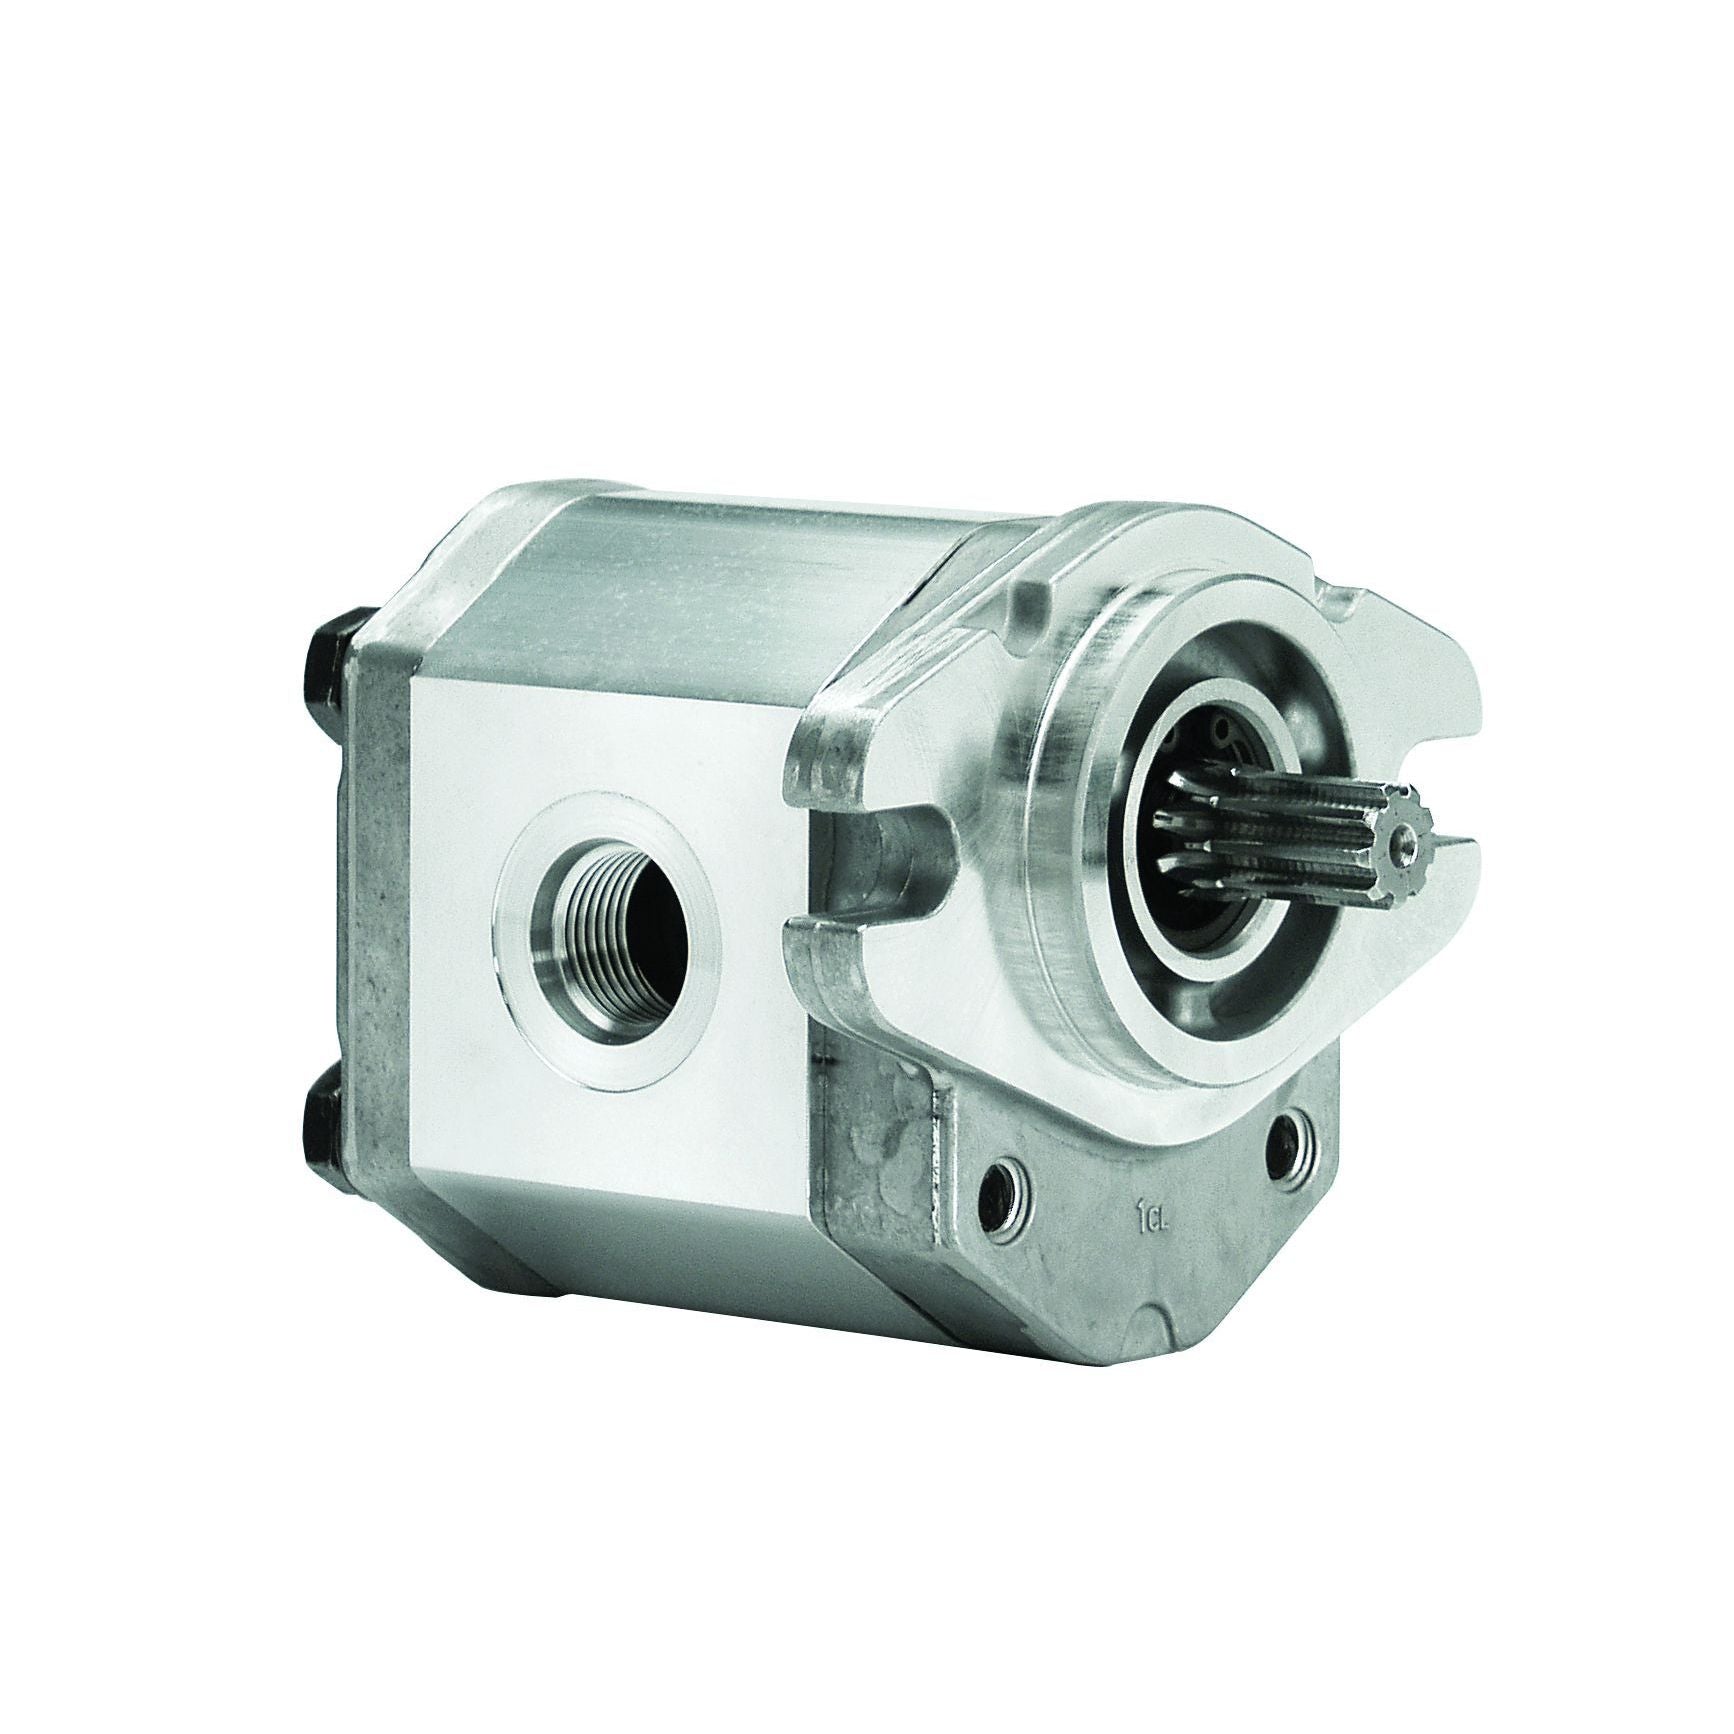 ALP3A-D-30-S1-FA : Marzocchi Gear Pump, CW, 20cc (1.22in3), 9.51 GPM, 3335psi, 3300 RPM, #16 SAE (1") In, #12 SAE (3/4") Out, Splined Shaft 13T 16/32DP, SAE B 2-Bolt Mount